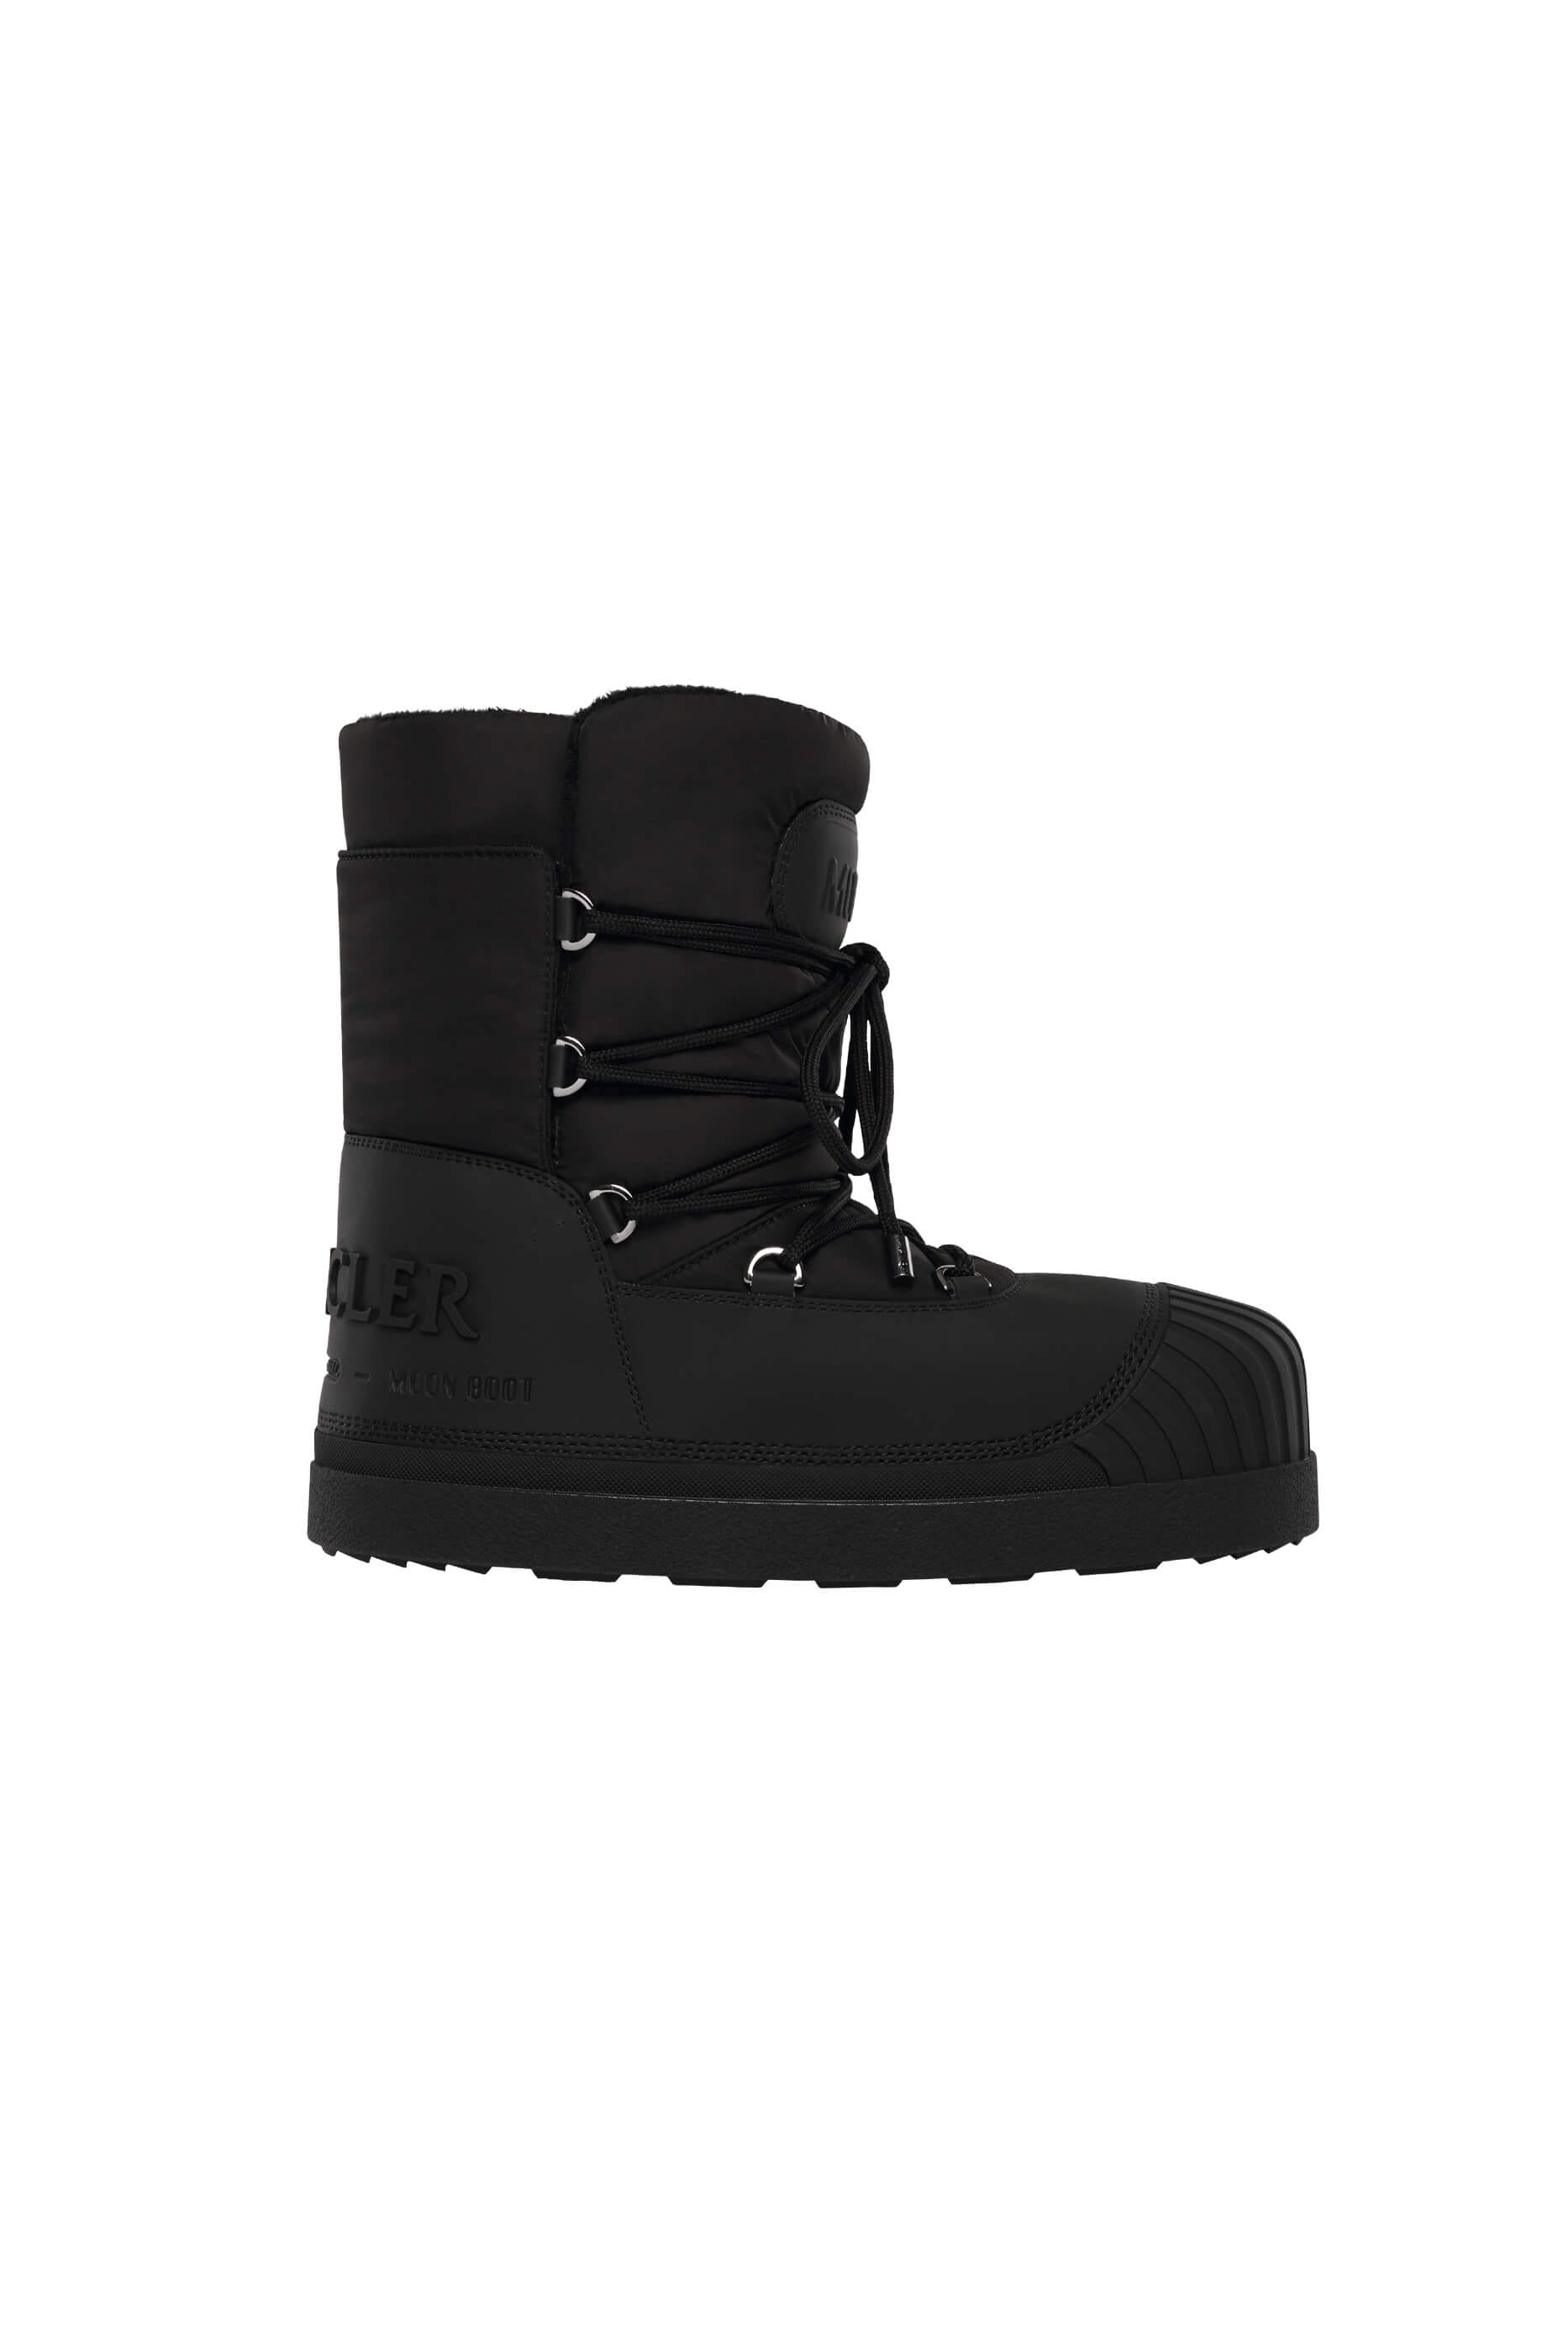 Gear up in style on the snow slopes with Moncler and Moon Boot - Men's ...